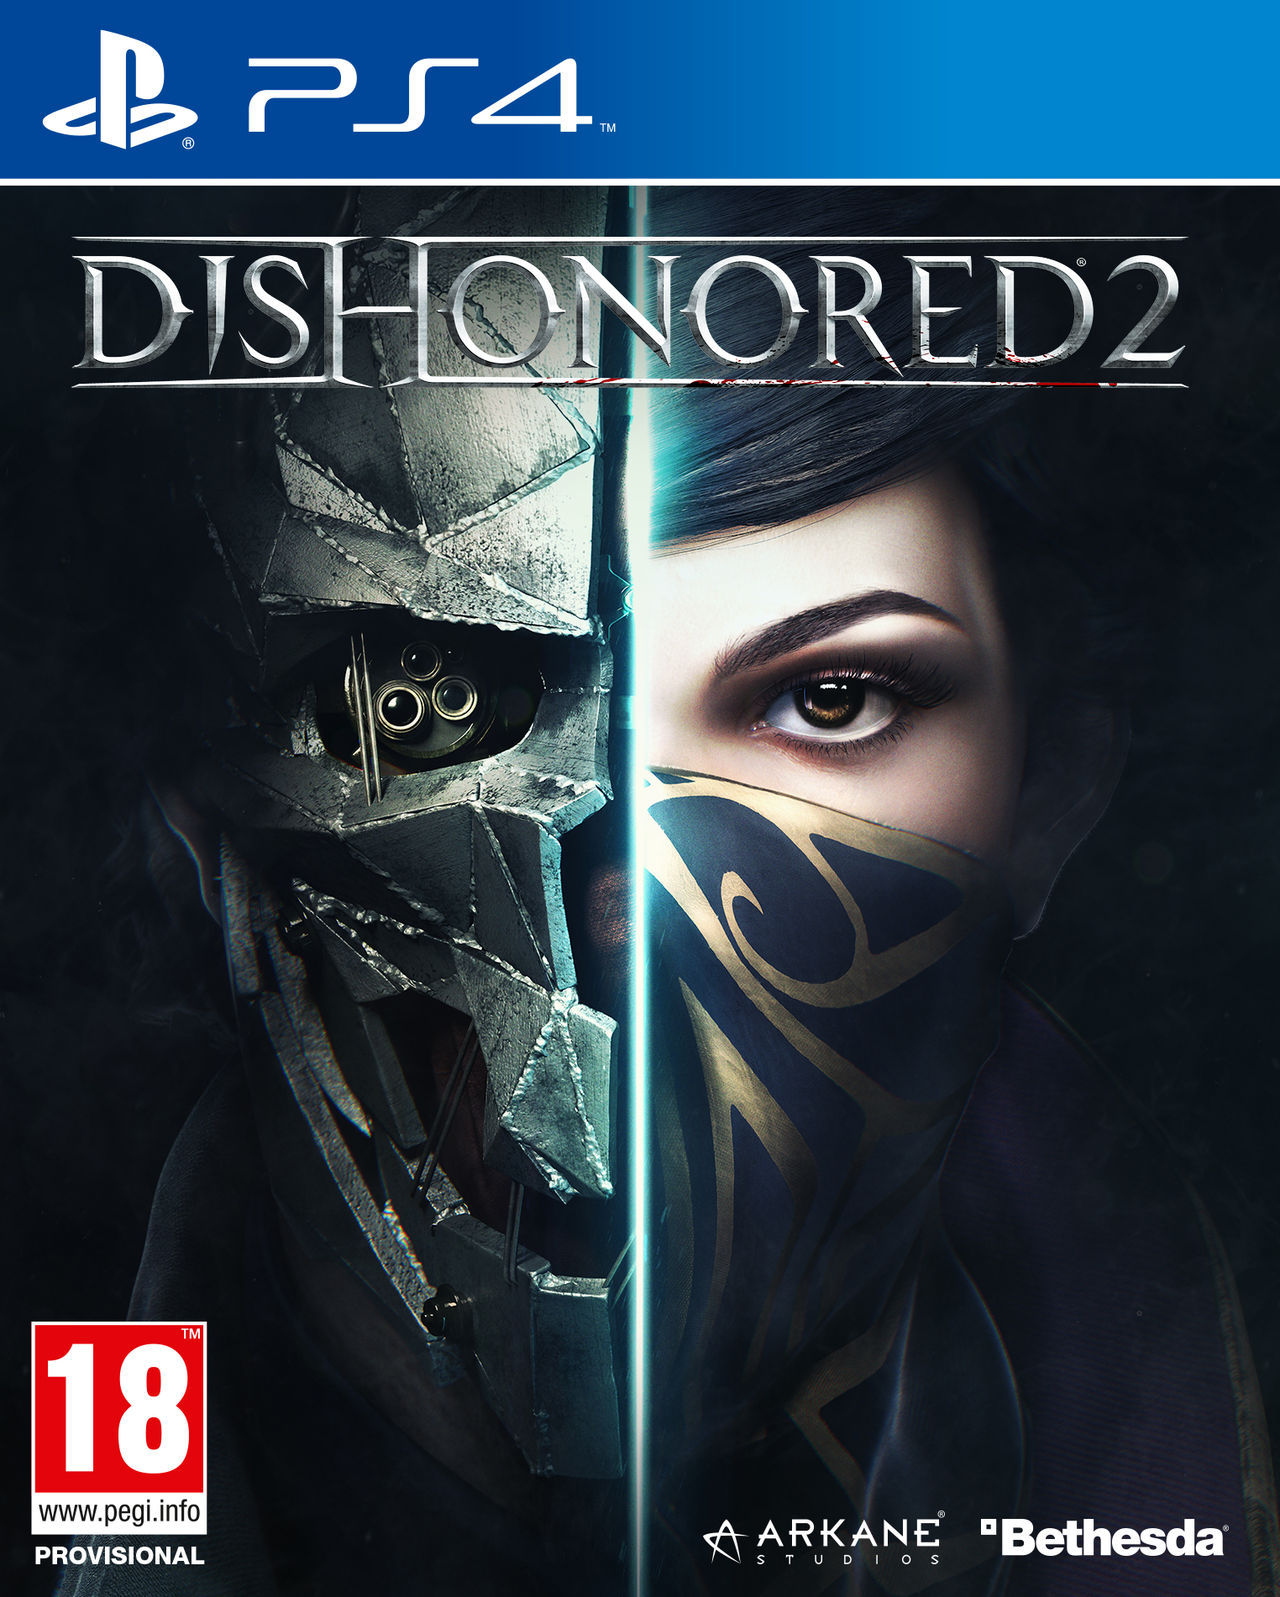 JUEGO SONY PS4 DISHONORED 2